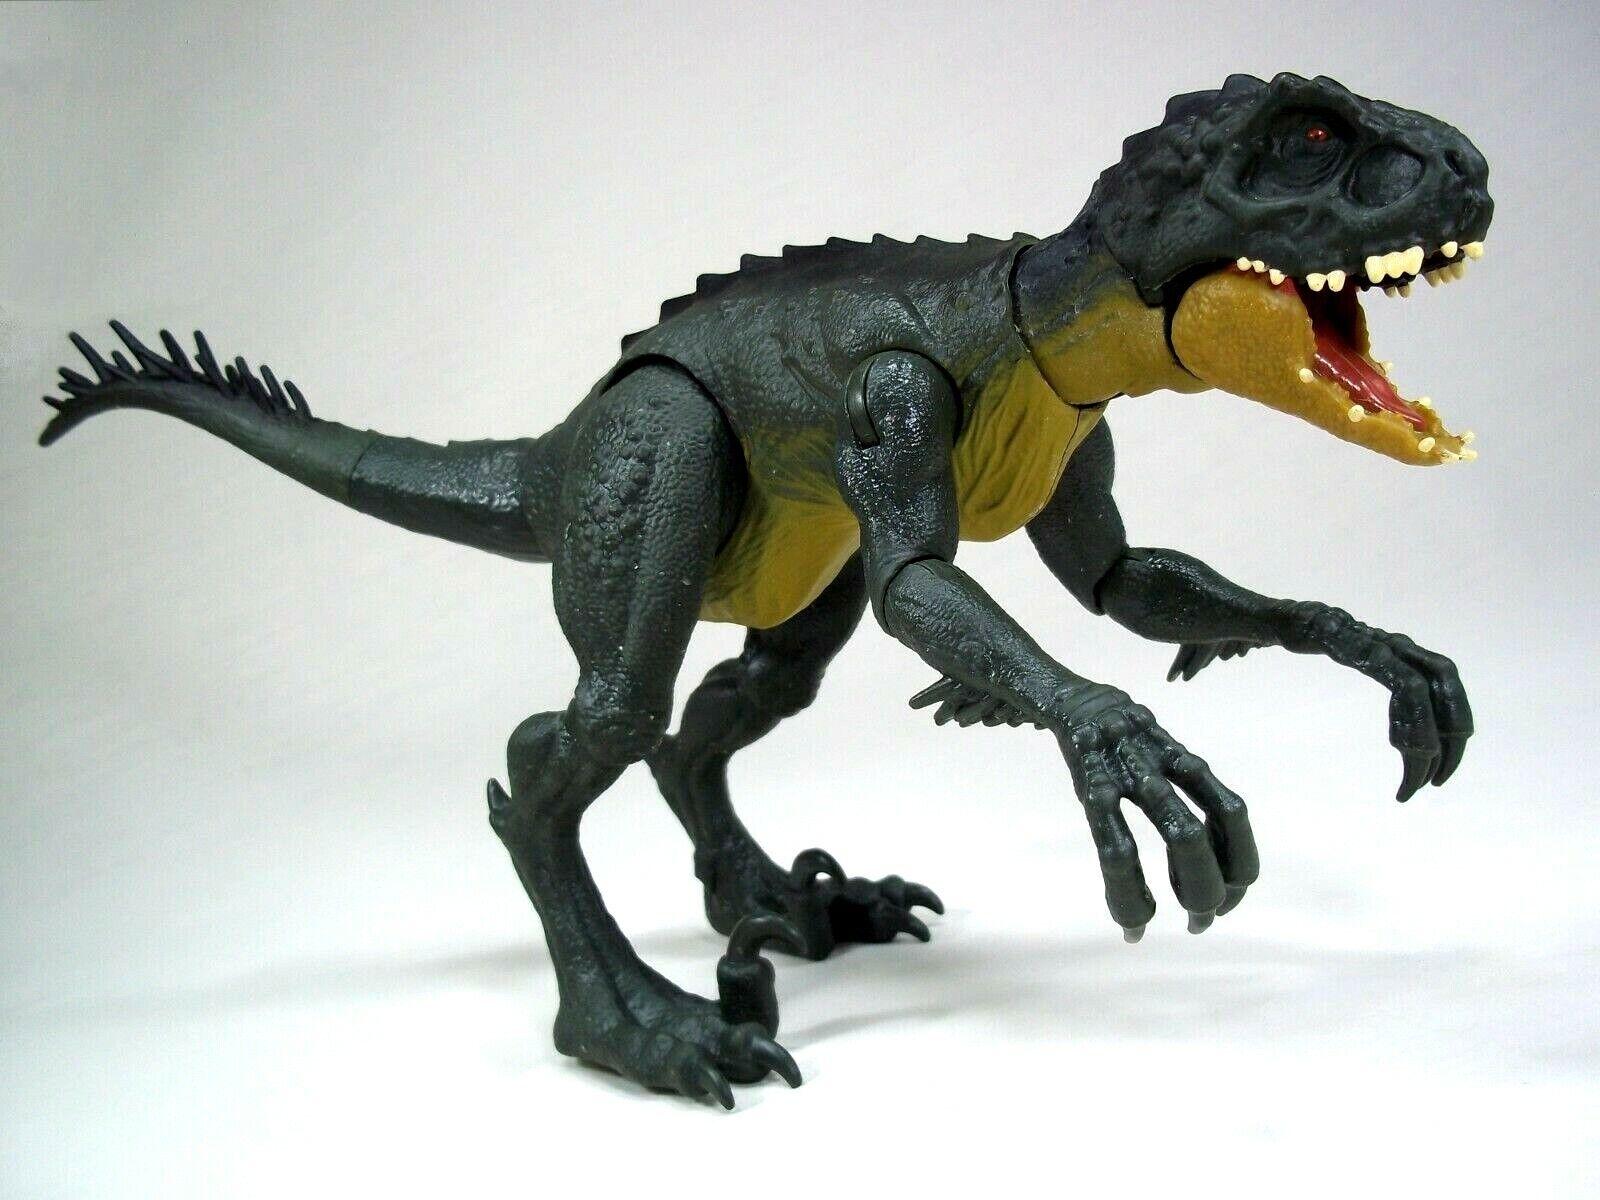 Who would win in a fight between E750Scorpius Rex and Indoraptor  Quora